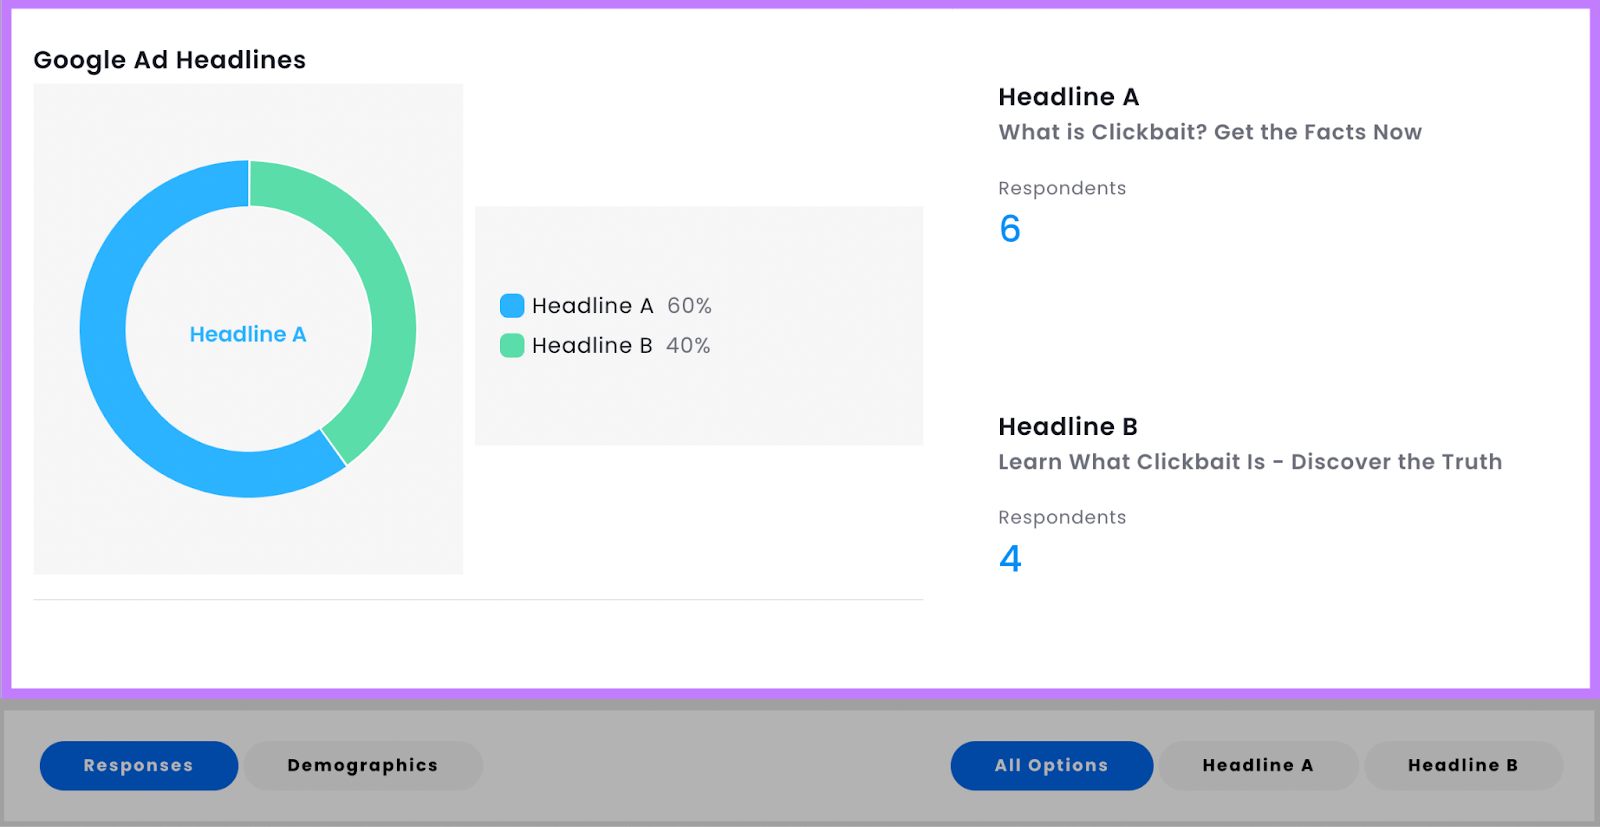 Results for Headline A and Headline B show Headline A generated more clicks